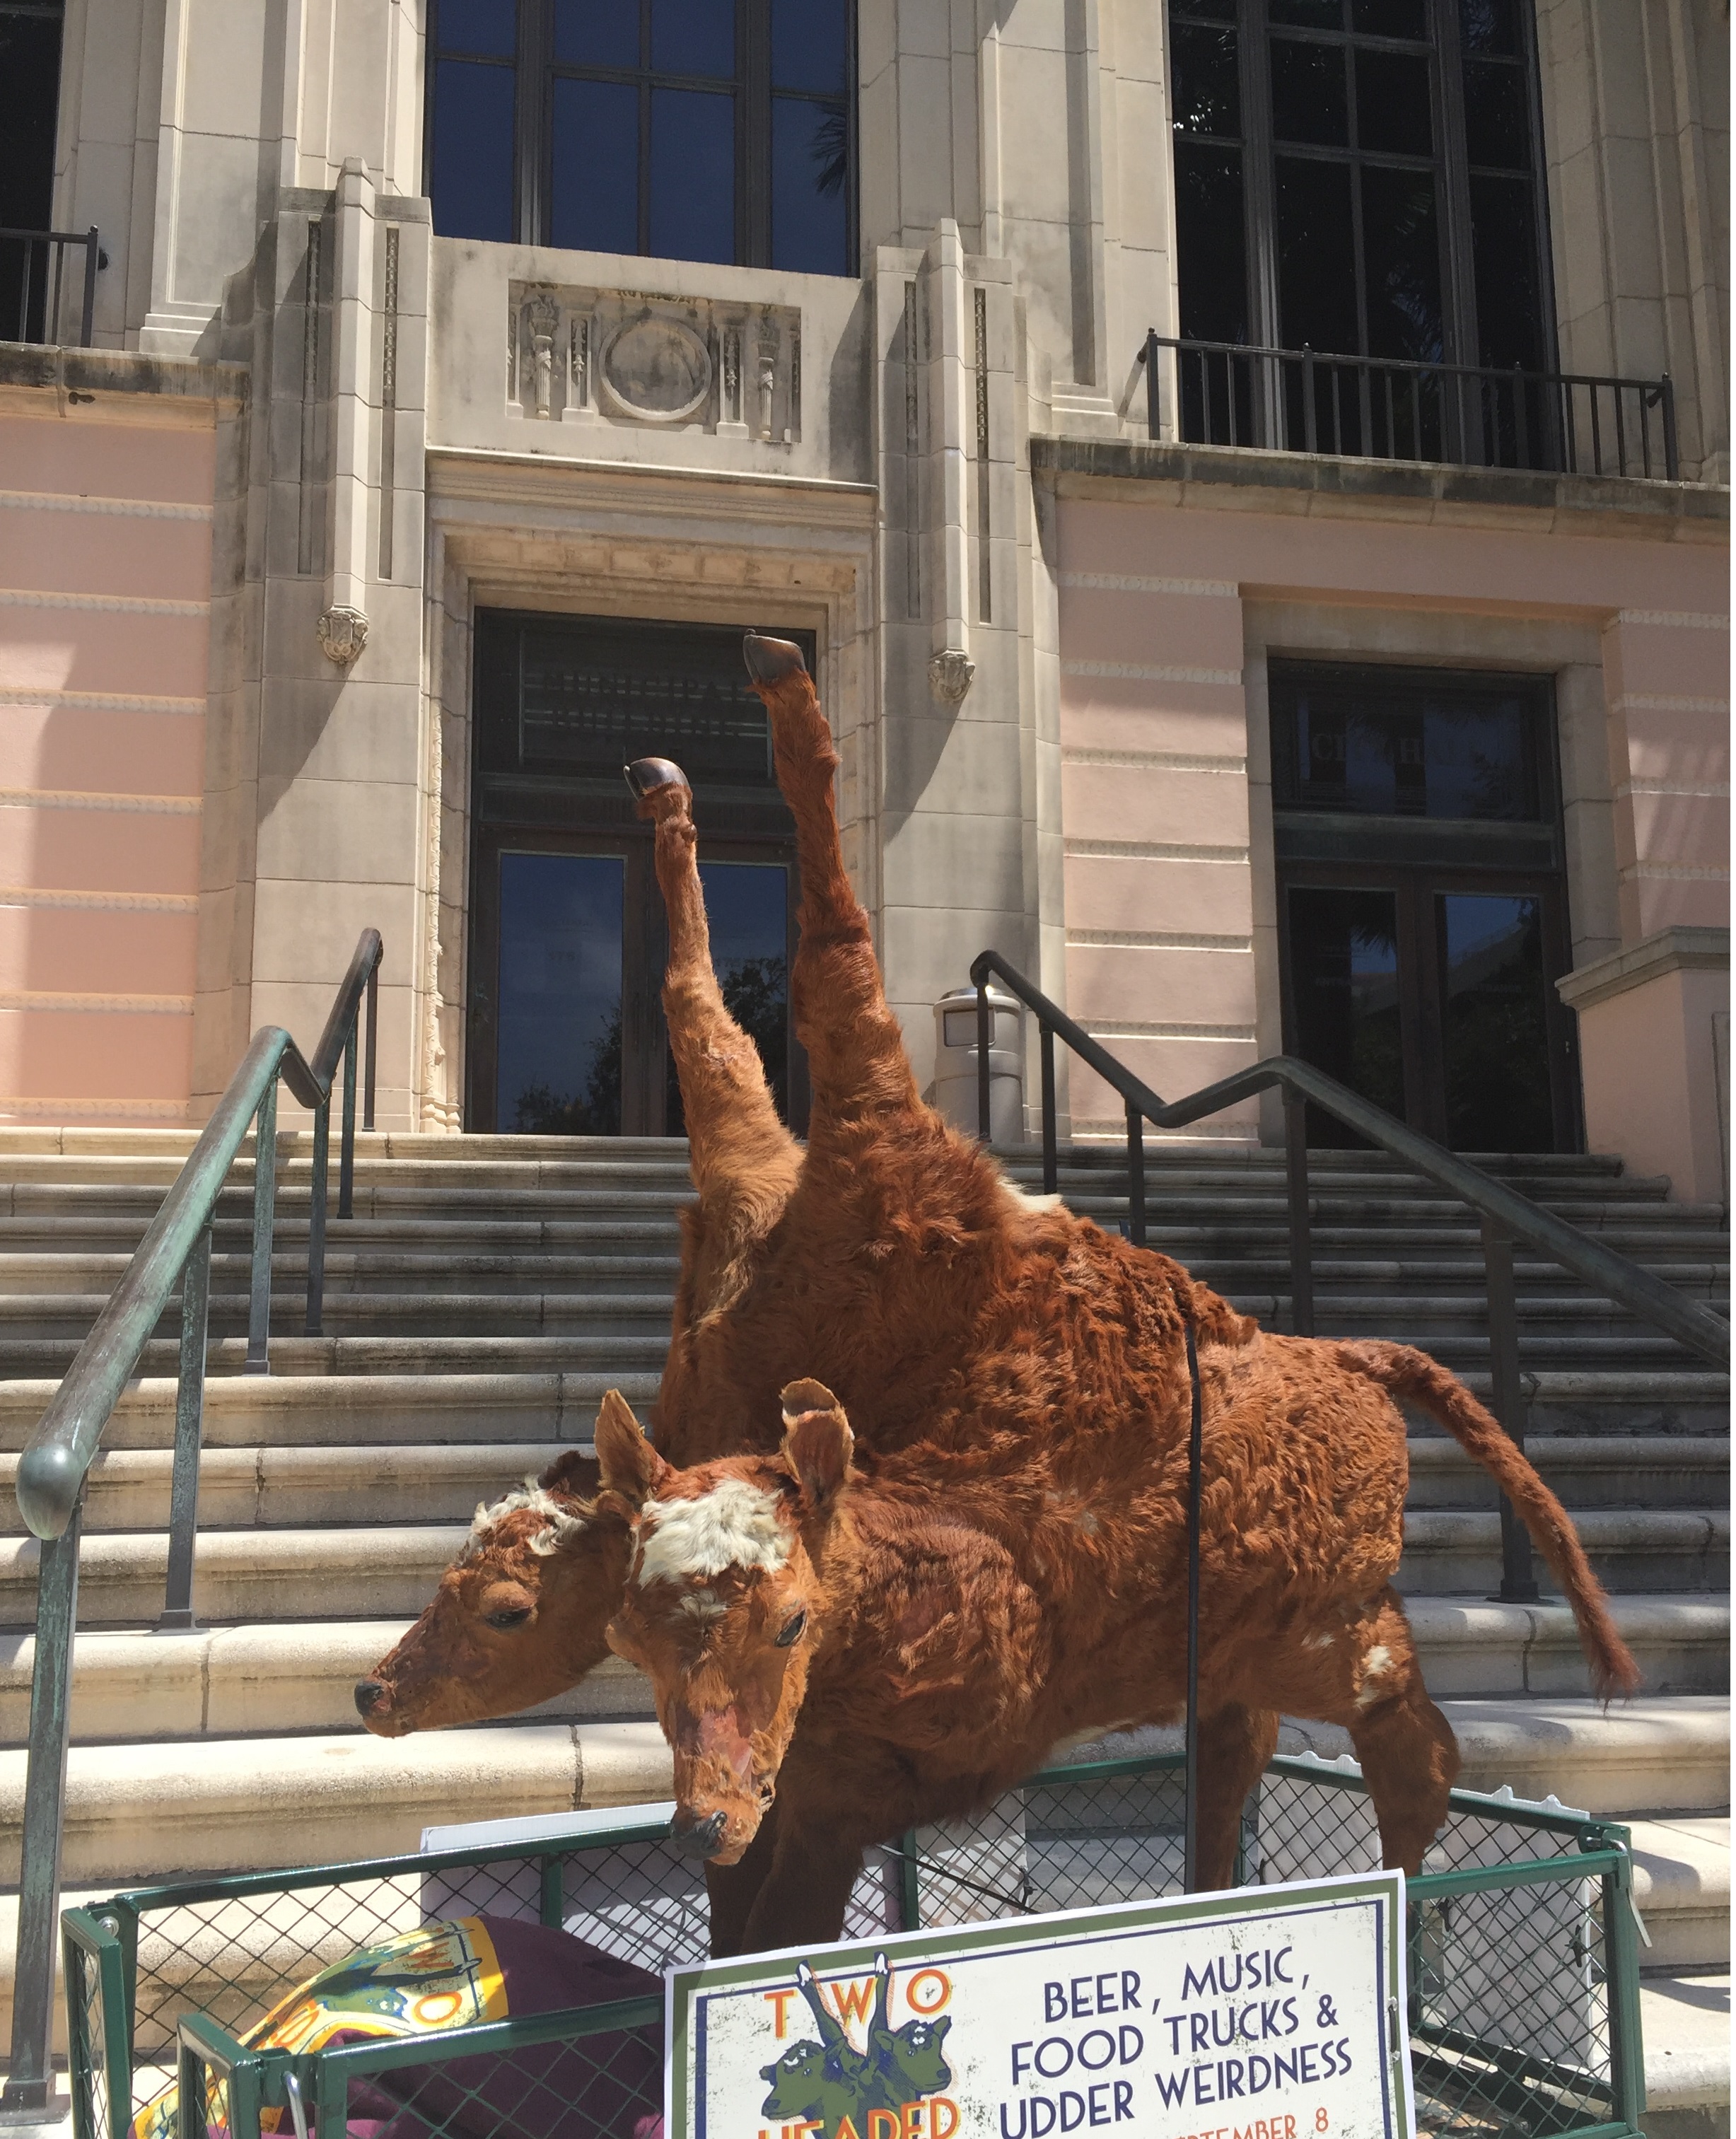 The two-headed calf makes a stop at City Hall. Photo courtesy of the St. Petersburg Museum of History.